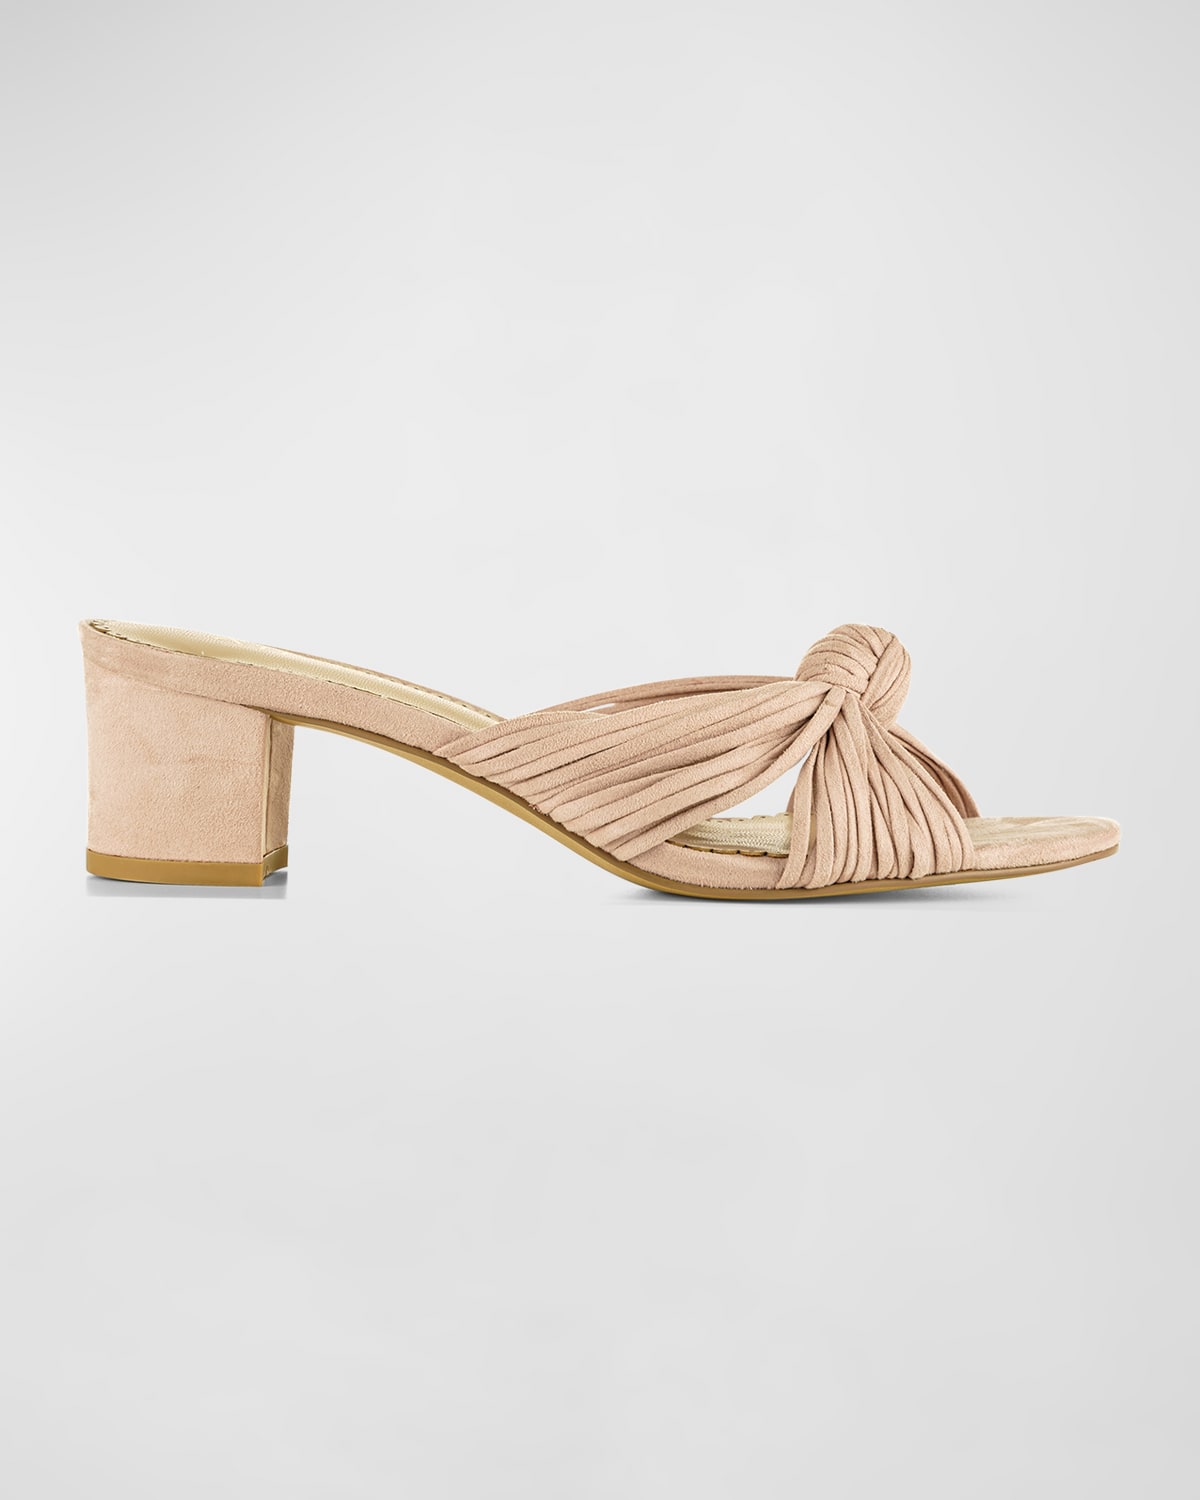 Sophie Knotted Block-Heel Mules